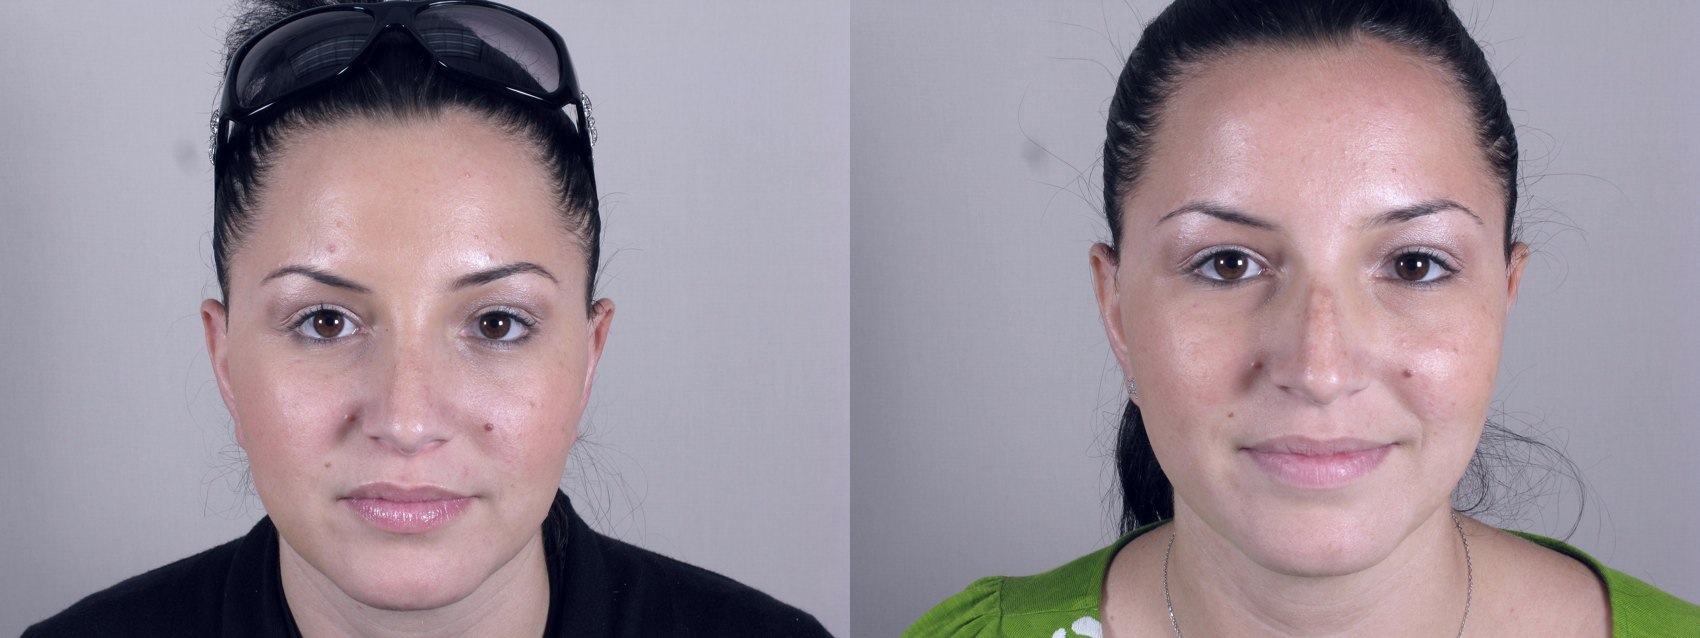 rhinoplasty-after-before-front.jpg